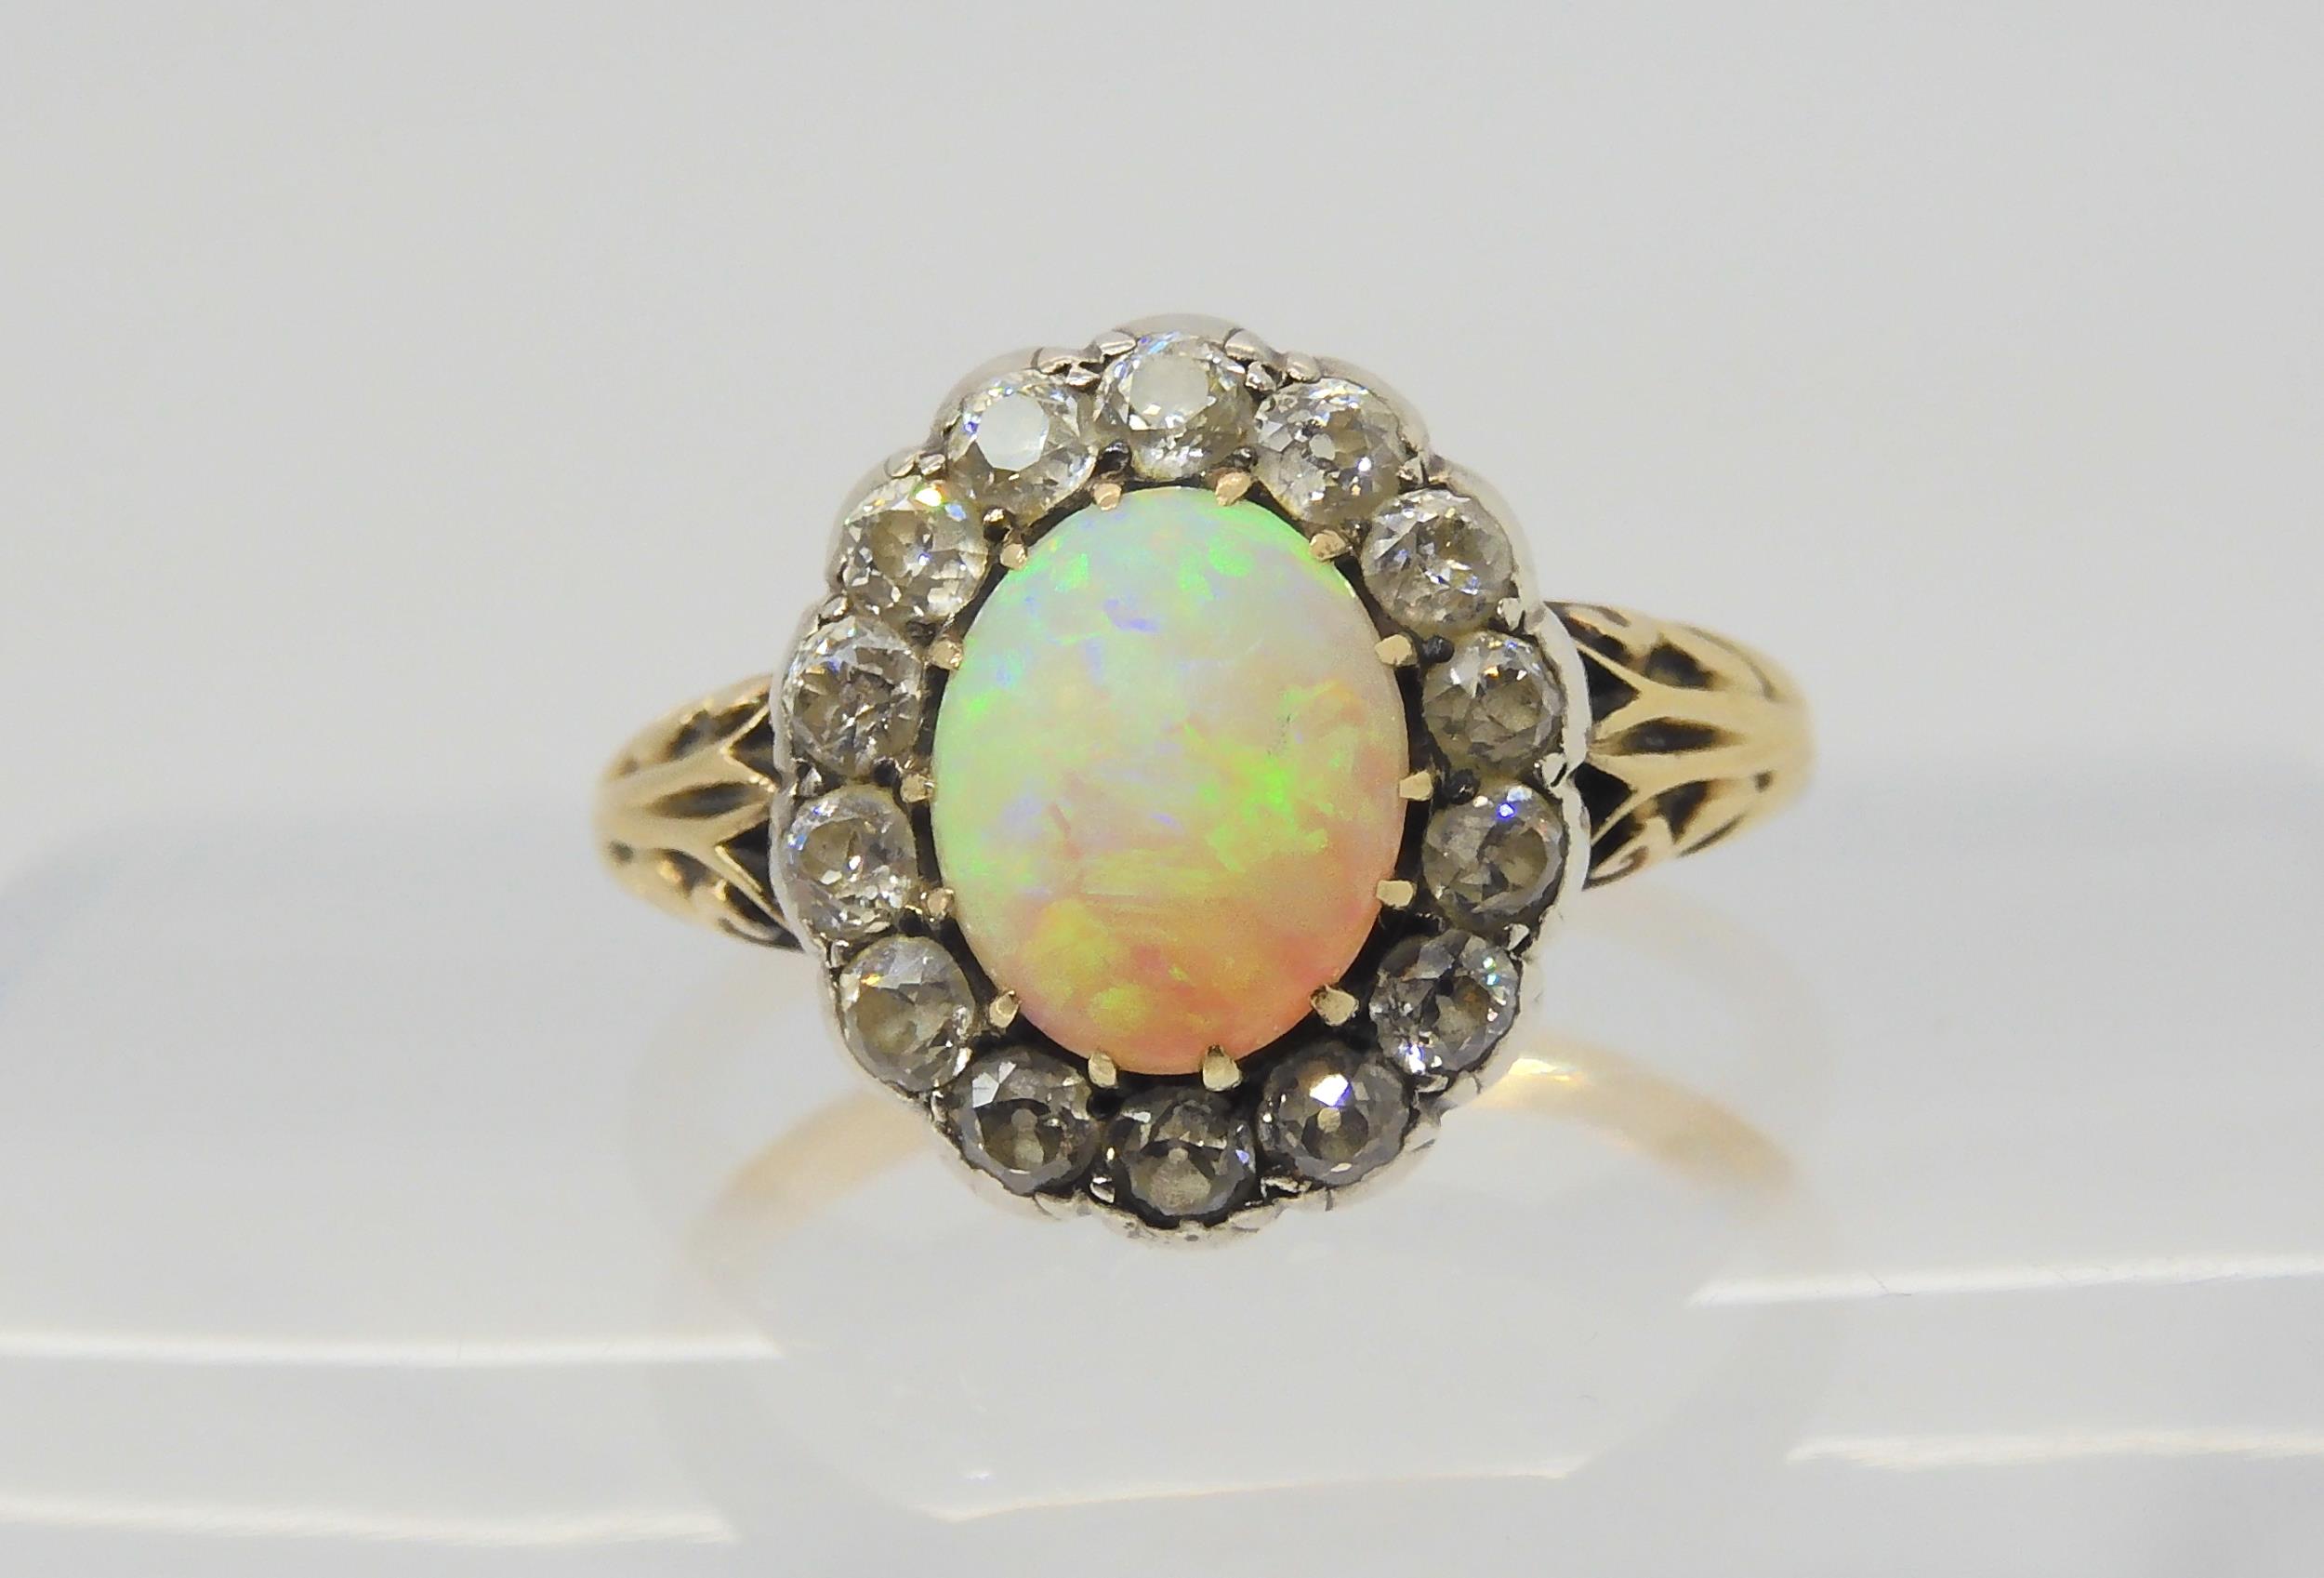 AN OPAL AND DIAMOND RING set with a high domed opal of approx 8.8mm x 7.1mm x 4.1mm, surrounded with - Image 3 of 5